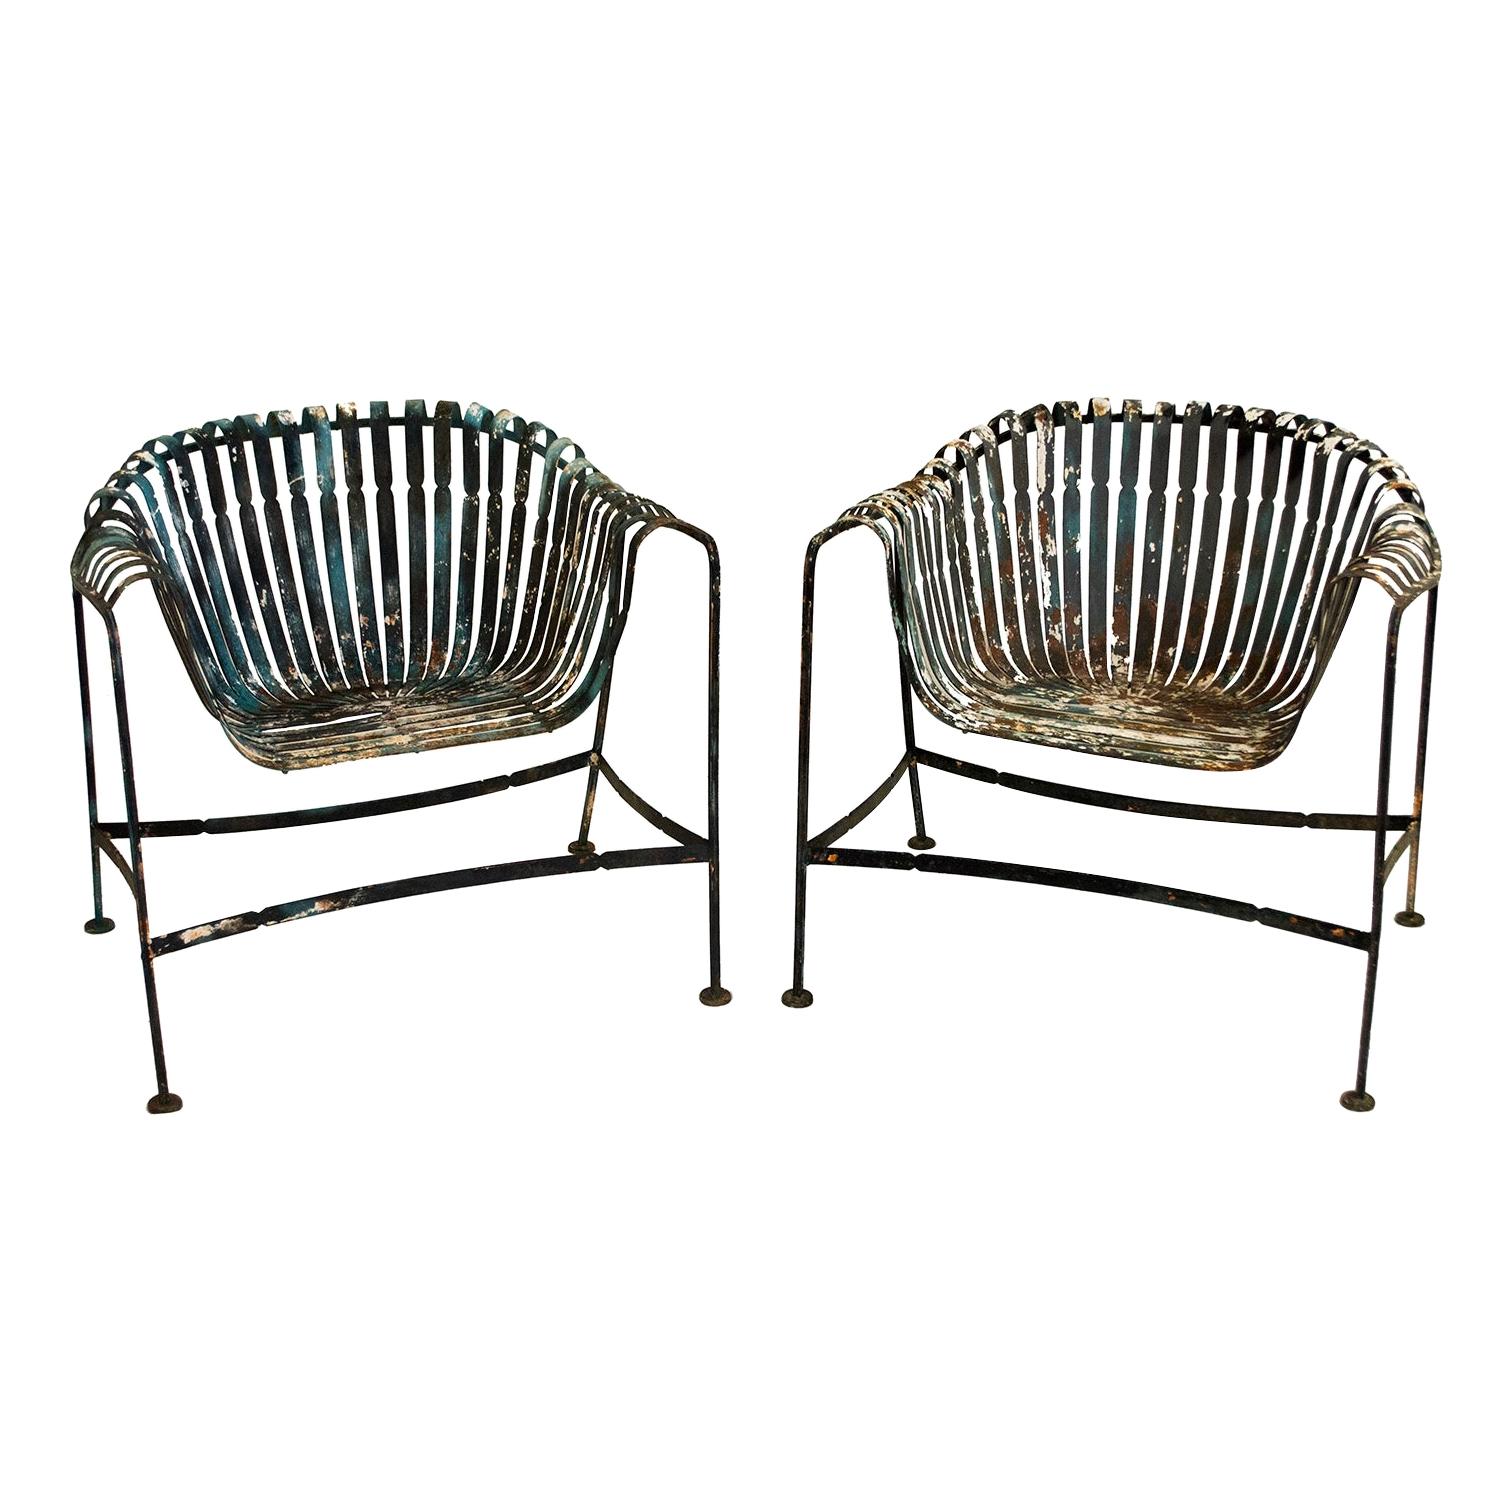 Francois Carre Inspired French Garden Chairs by Woodard For Sale